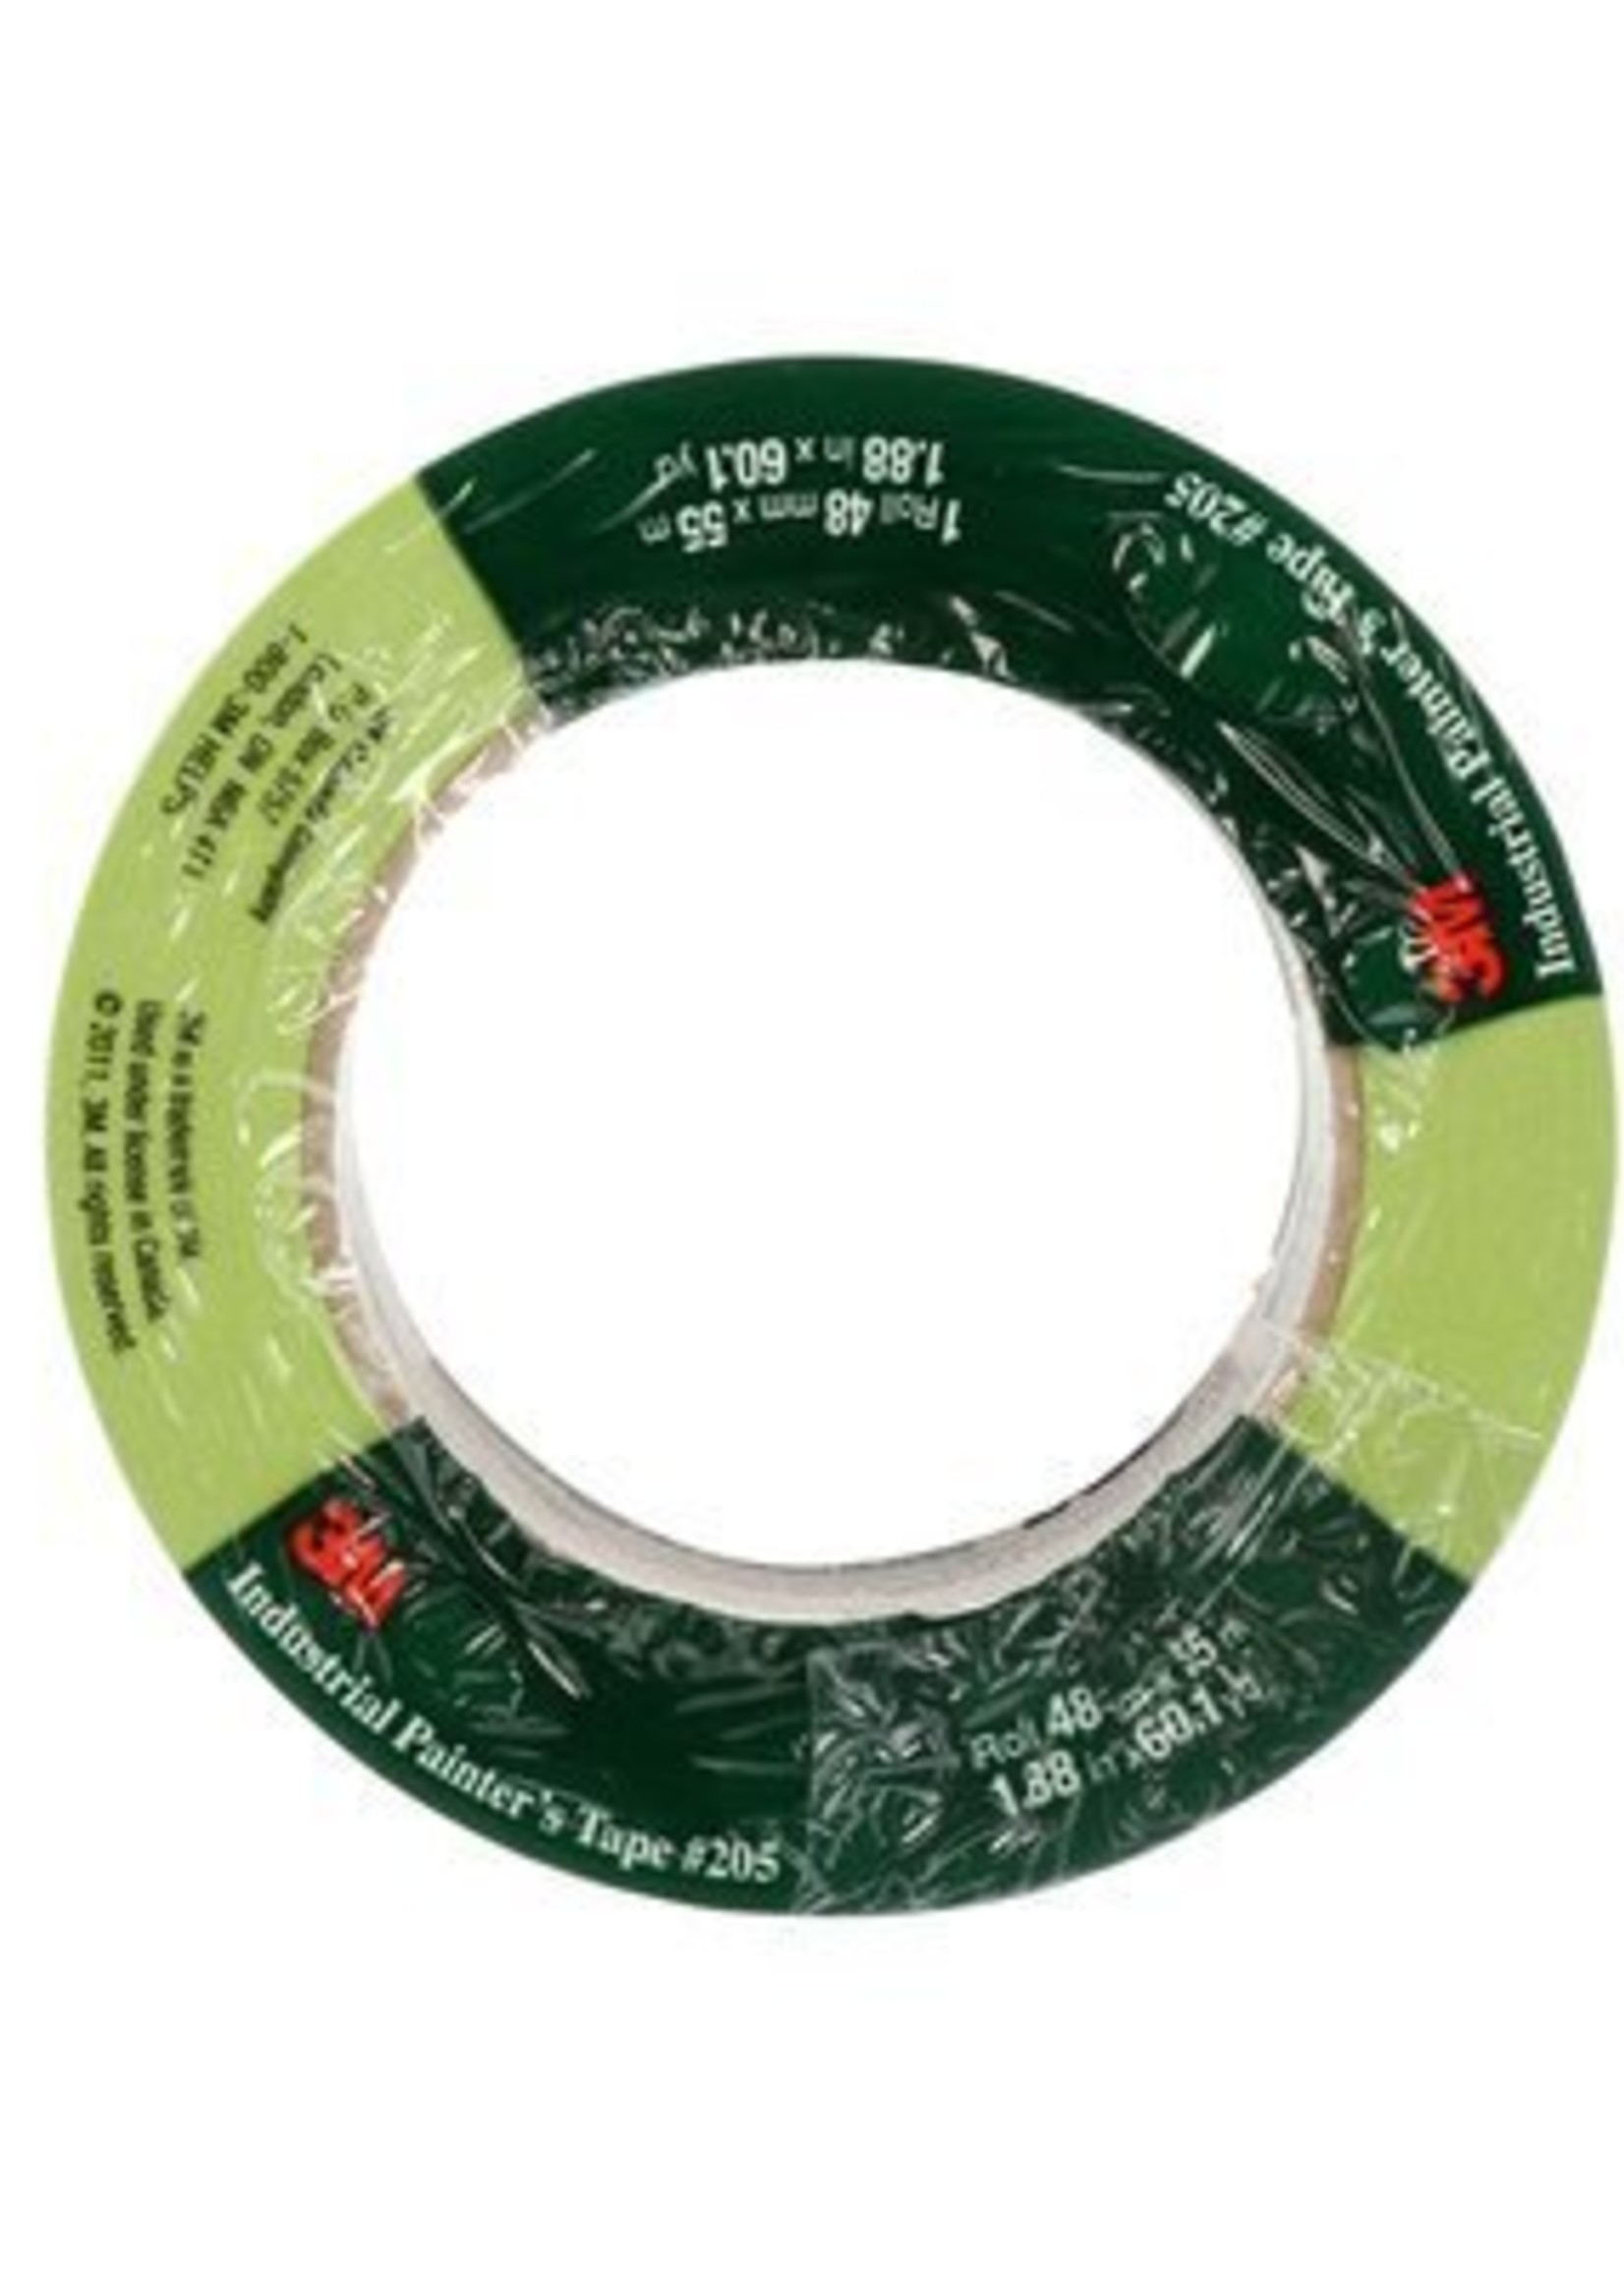 3M 3M PAINTERS TAPE GREEN 1"x60YD # 233